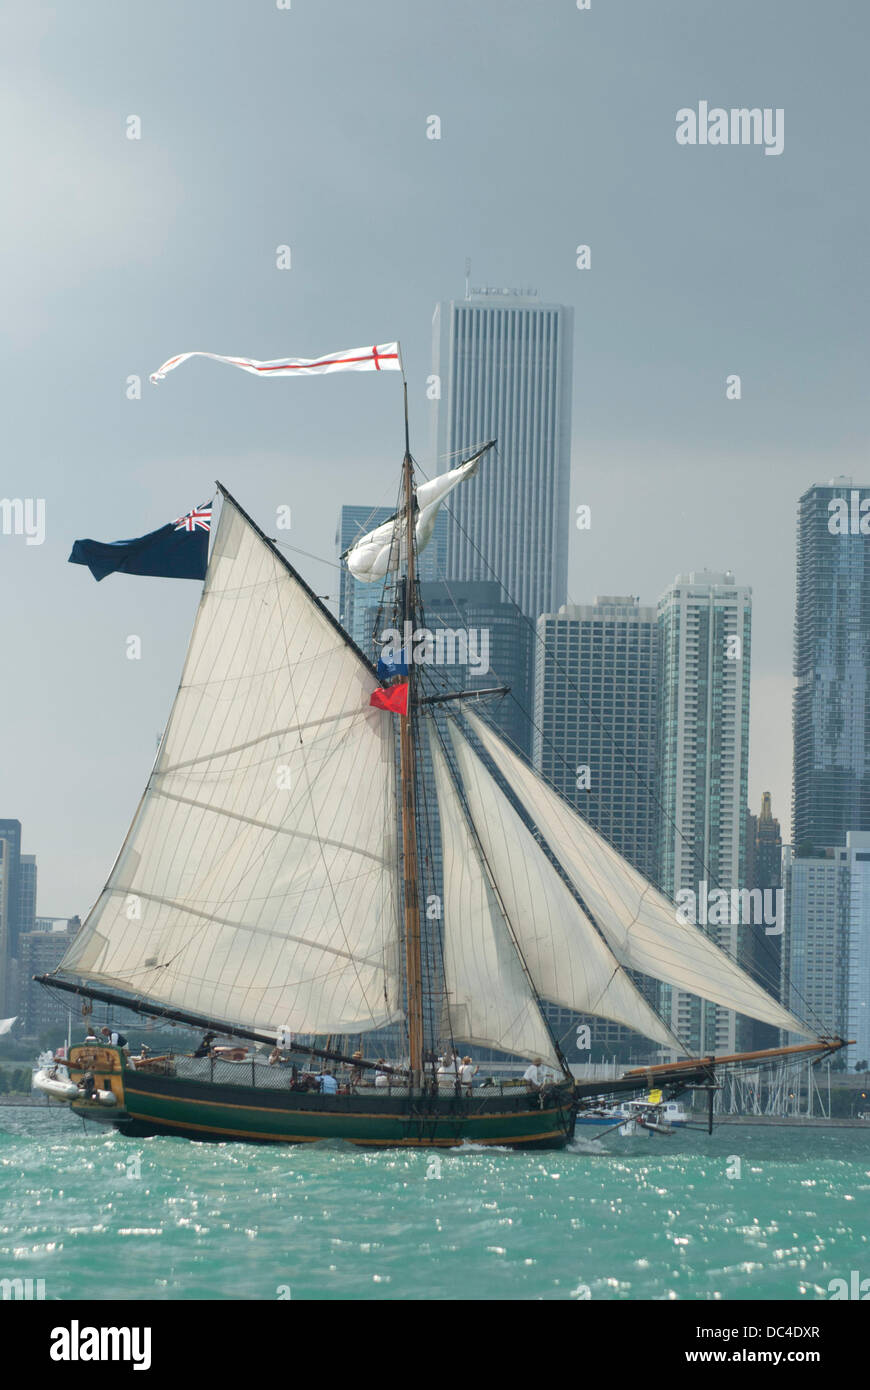 Chicago, Illinois, USA. 7th Aug, 2013. Tall ships arrive in Chicago. Crowd gather at Navy Pier to watch the parade of boats as a downpour deluged the crowd and boats, forcing many of the boats to douse their sails. (Credit Image: © Karen I. Hirsch/ZUMA Wire) Stock Photo